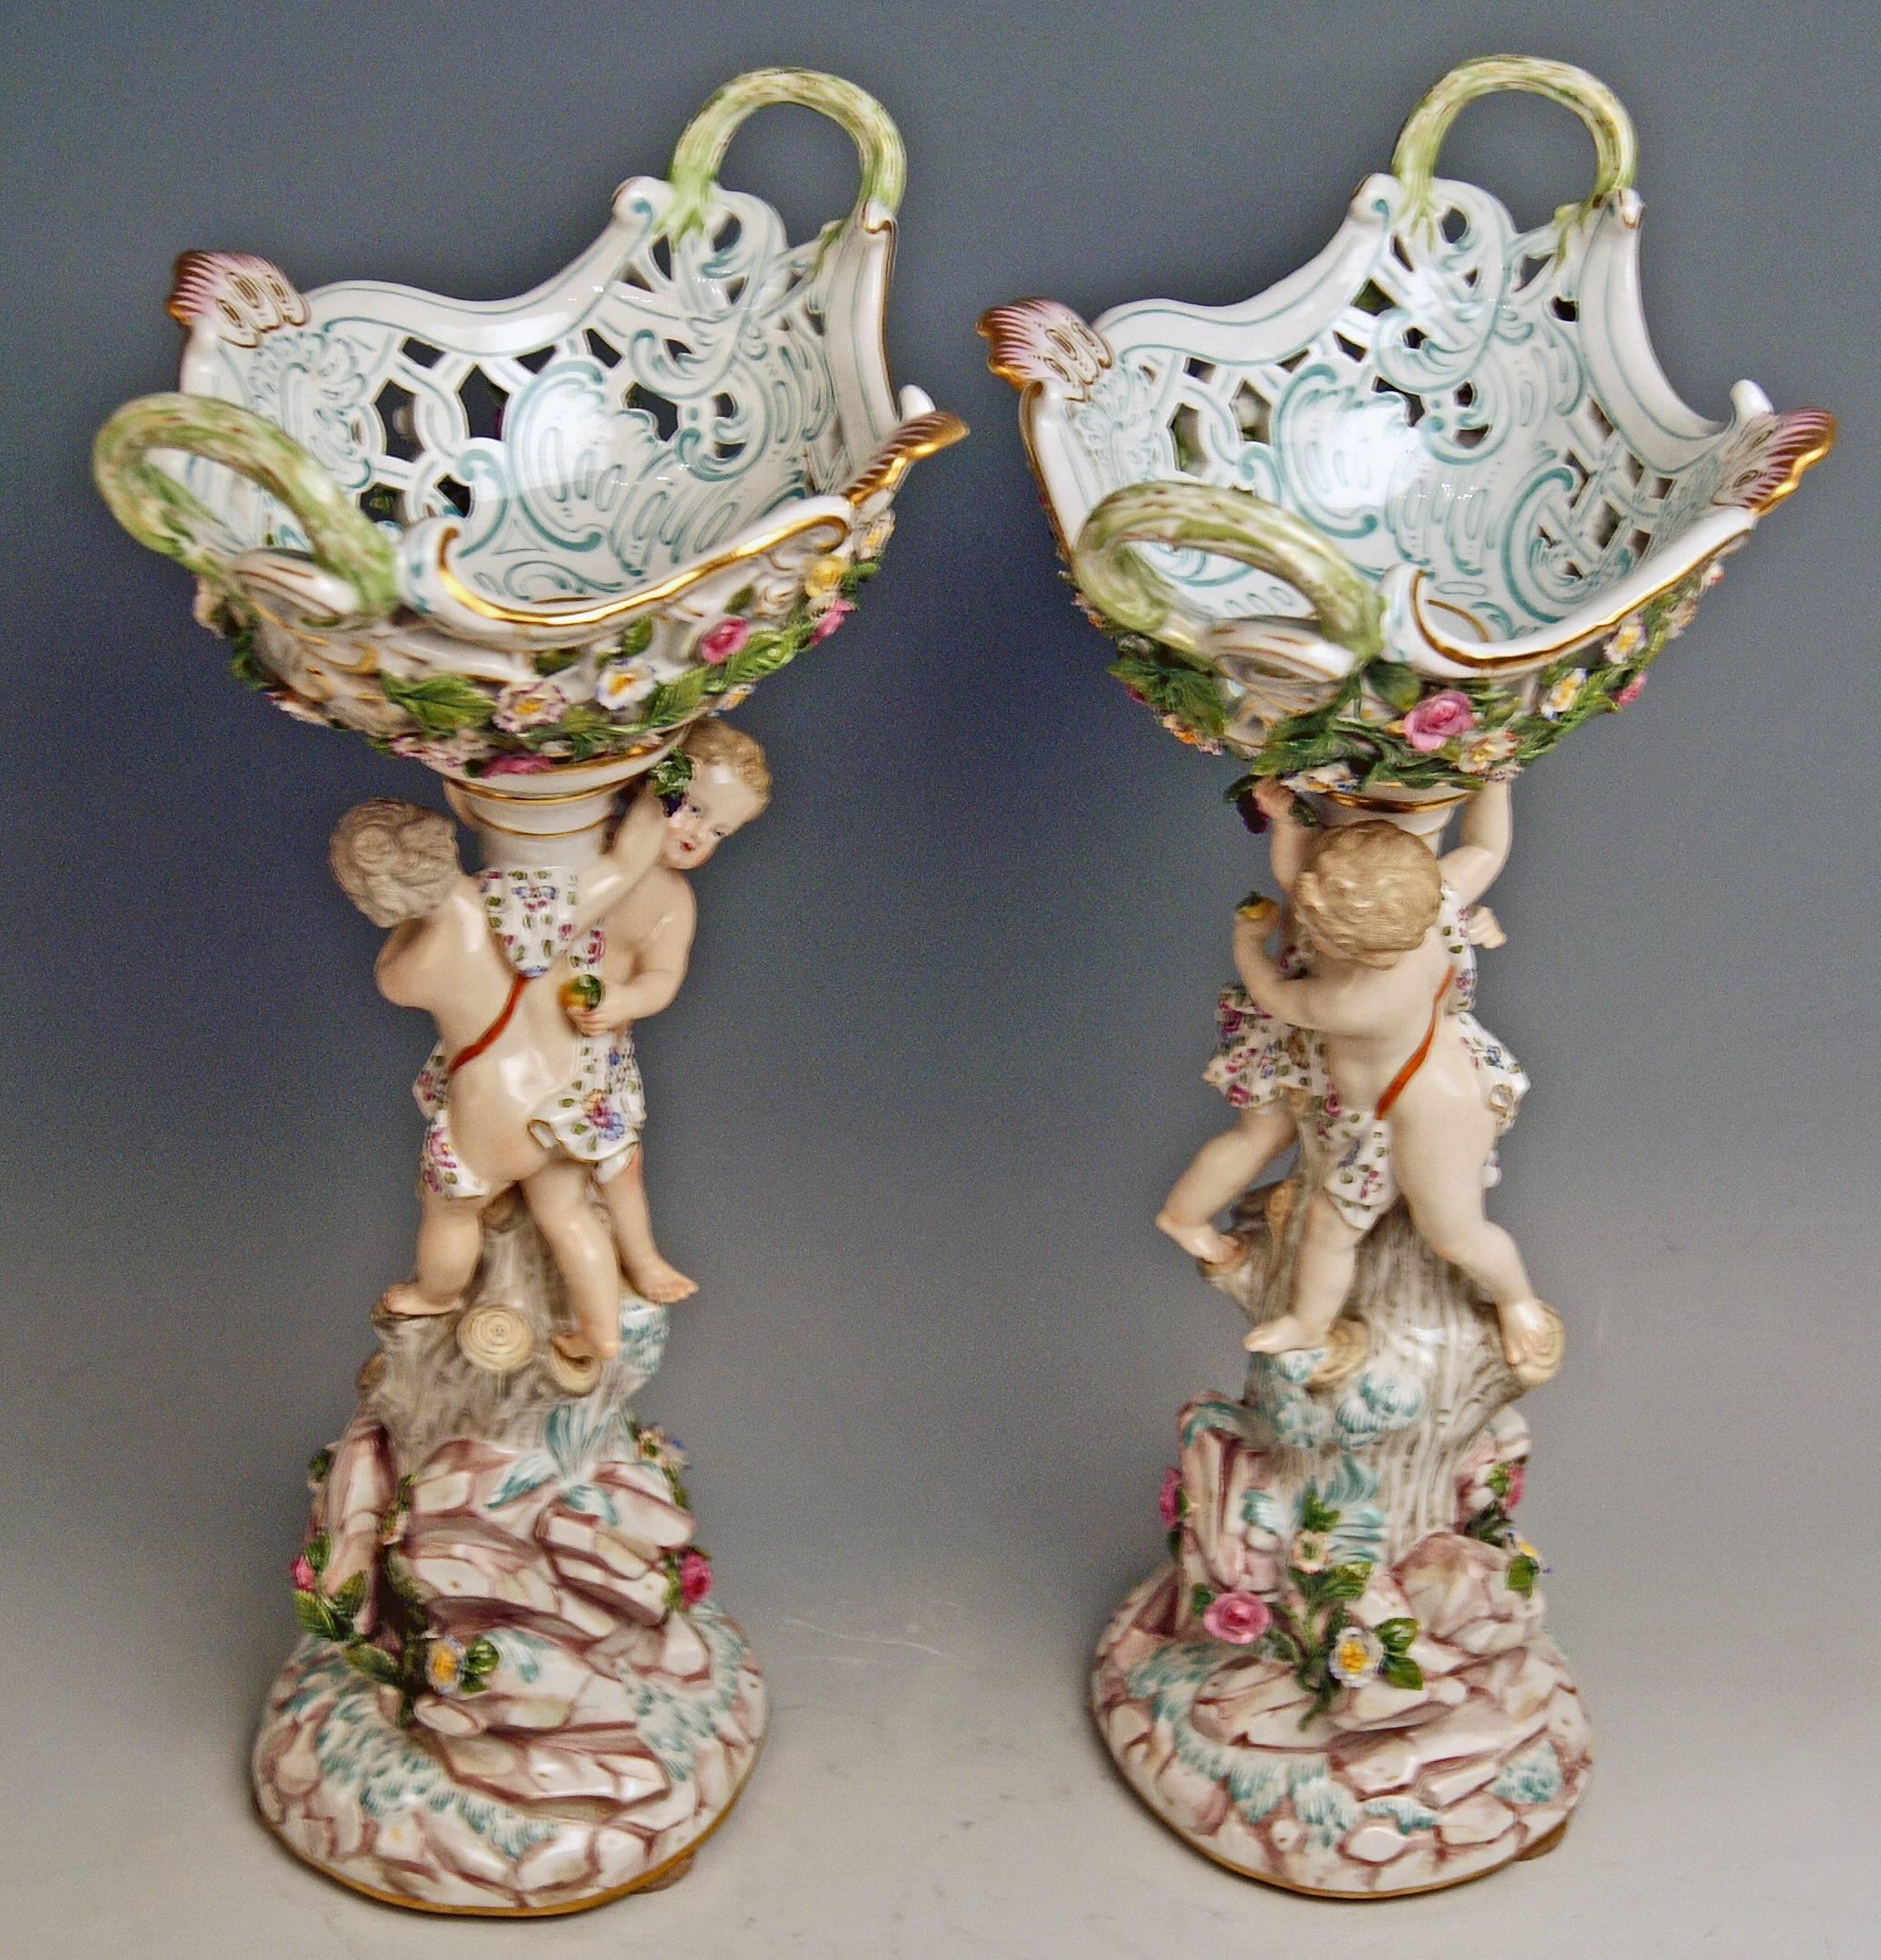 Meissen a pair of most remarkable centrepieces / fruit bowls: each of them decorated with a pair of cherubs (male and female)

Measures / dimensions: 
height 16.14 inches
width of basket 9.055 inches
depth of basket 7.28 inches

Manufactory: